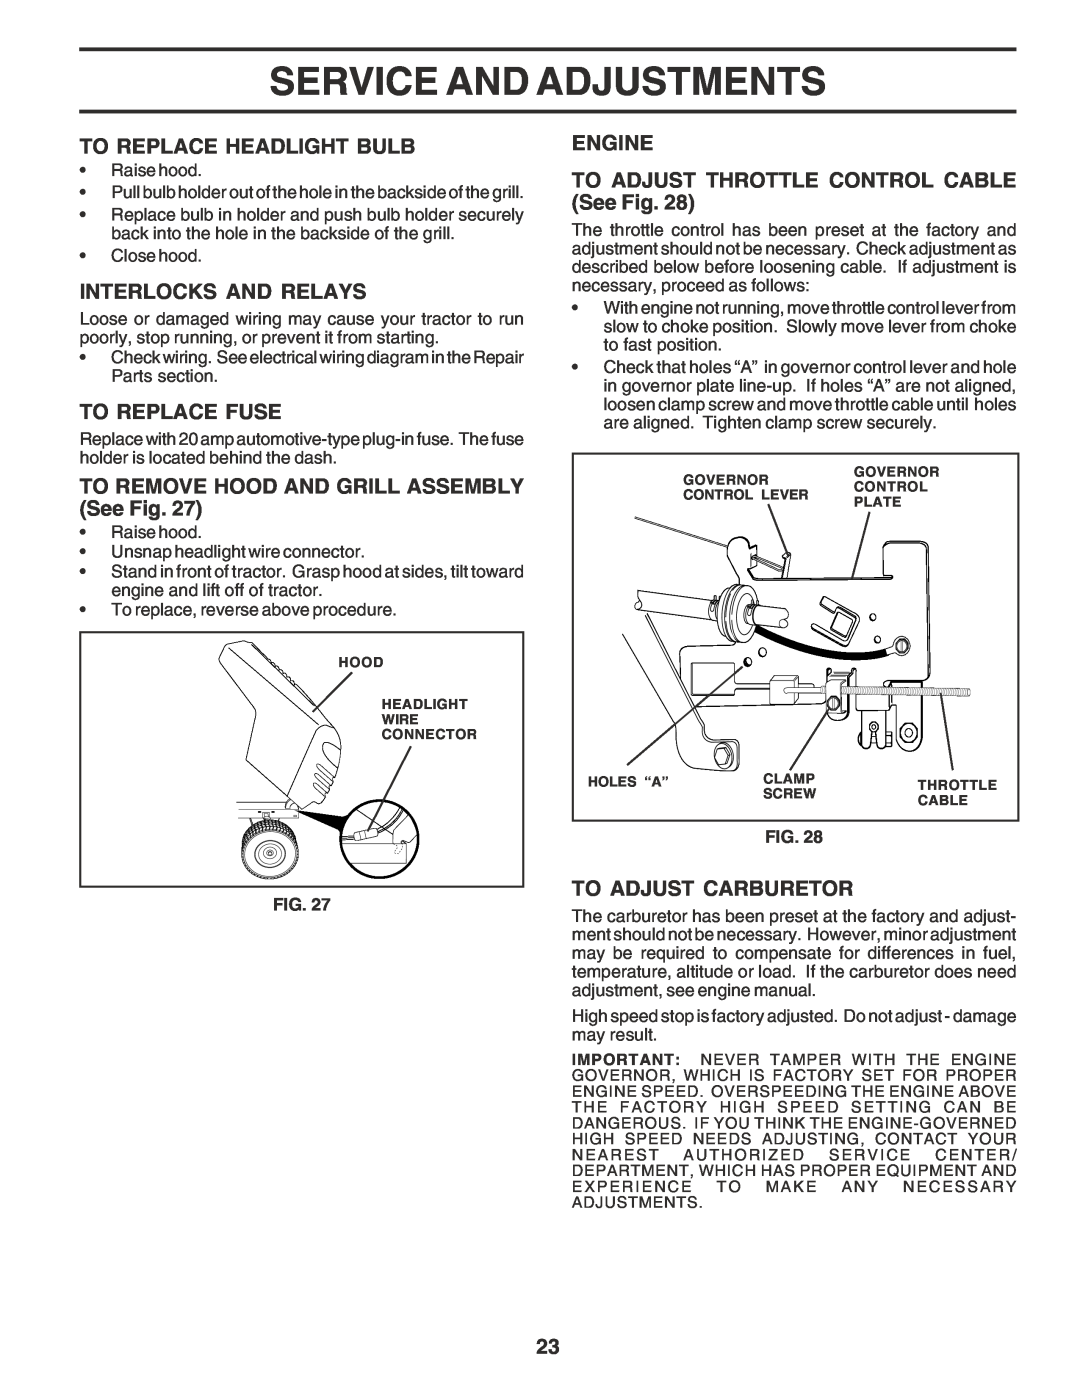 Poulan PO1538B manual To Replace Headlight Bulb, Interlocks And Relays, To Replace Fuse, To Adjust Carburetor 